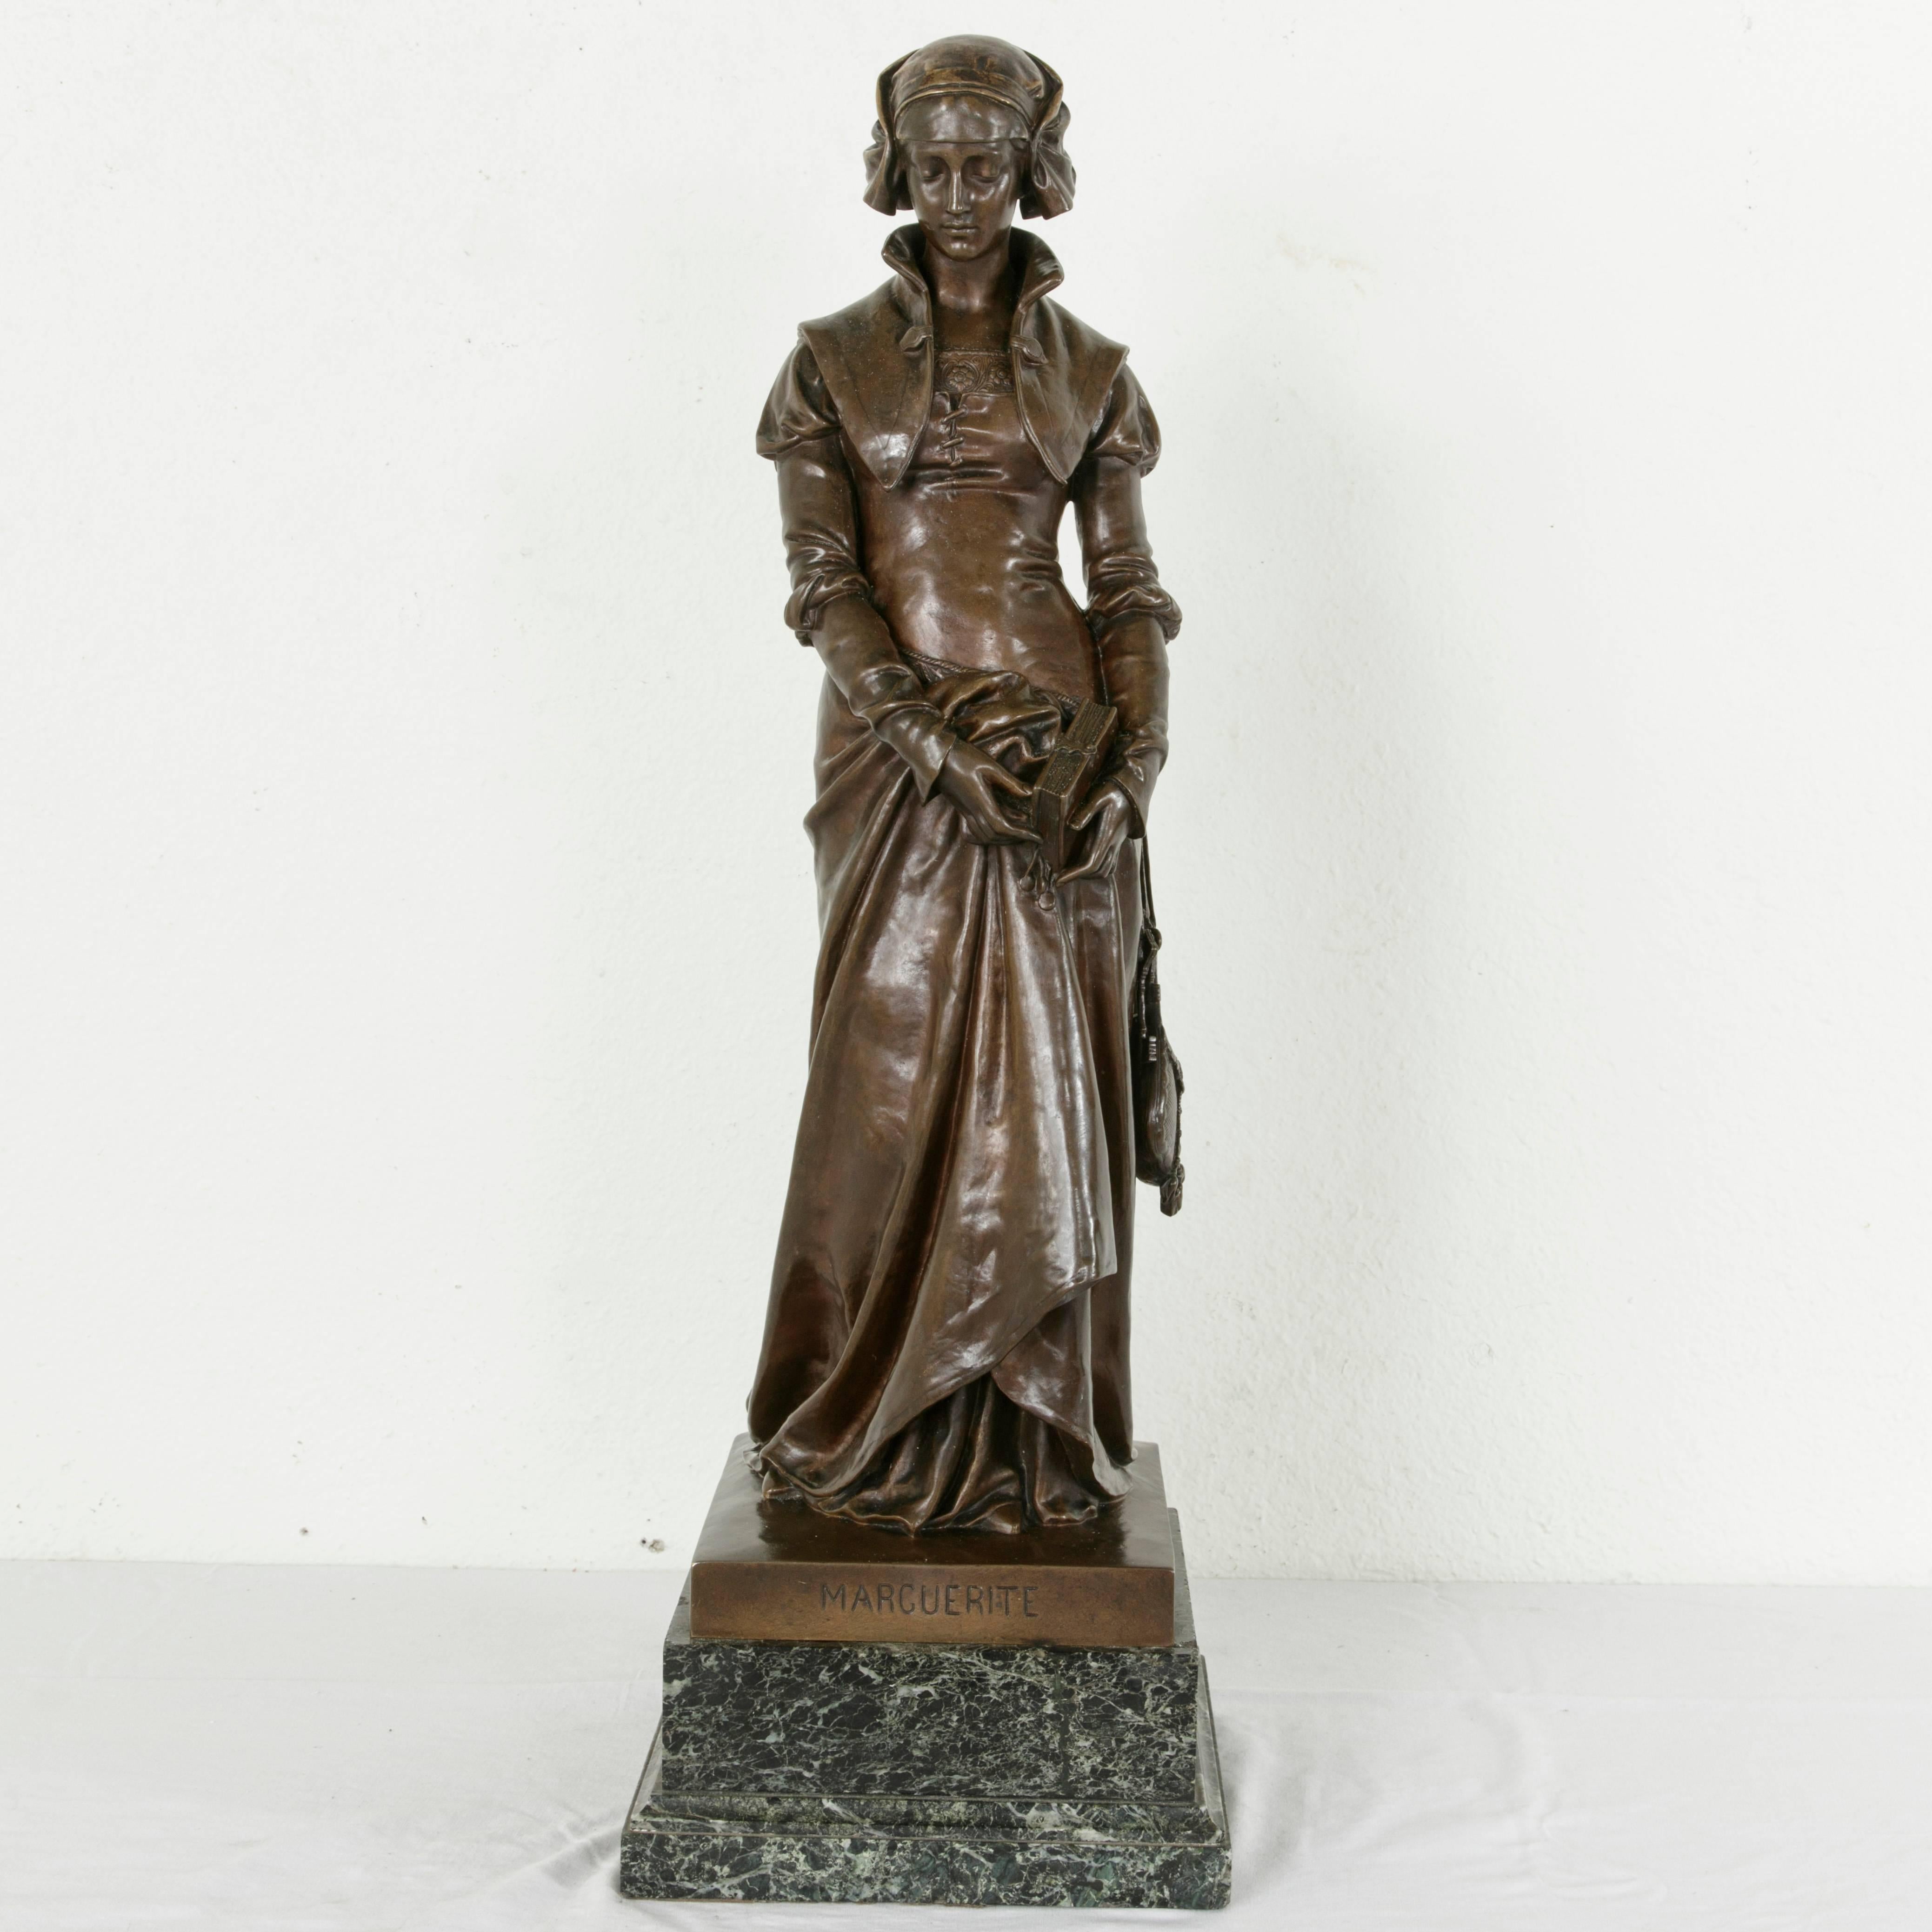 Standing at an impressive 32 inches in height, this late 19th century bronze statue on a green marble base entitled “Marguerite” features a woman with bowed head in Renaissance dress. Her hands carry a prayer book with a clasp, and rest gently at